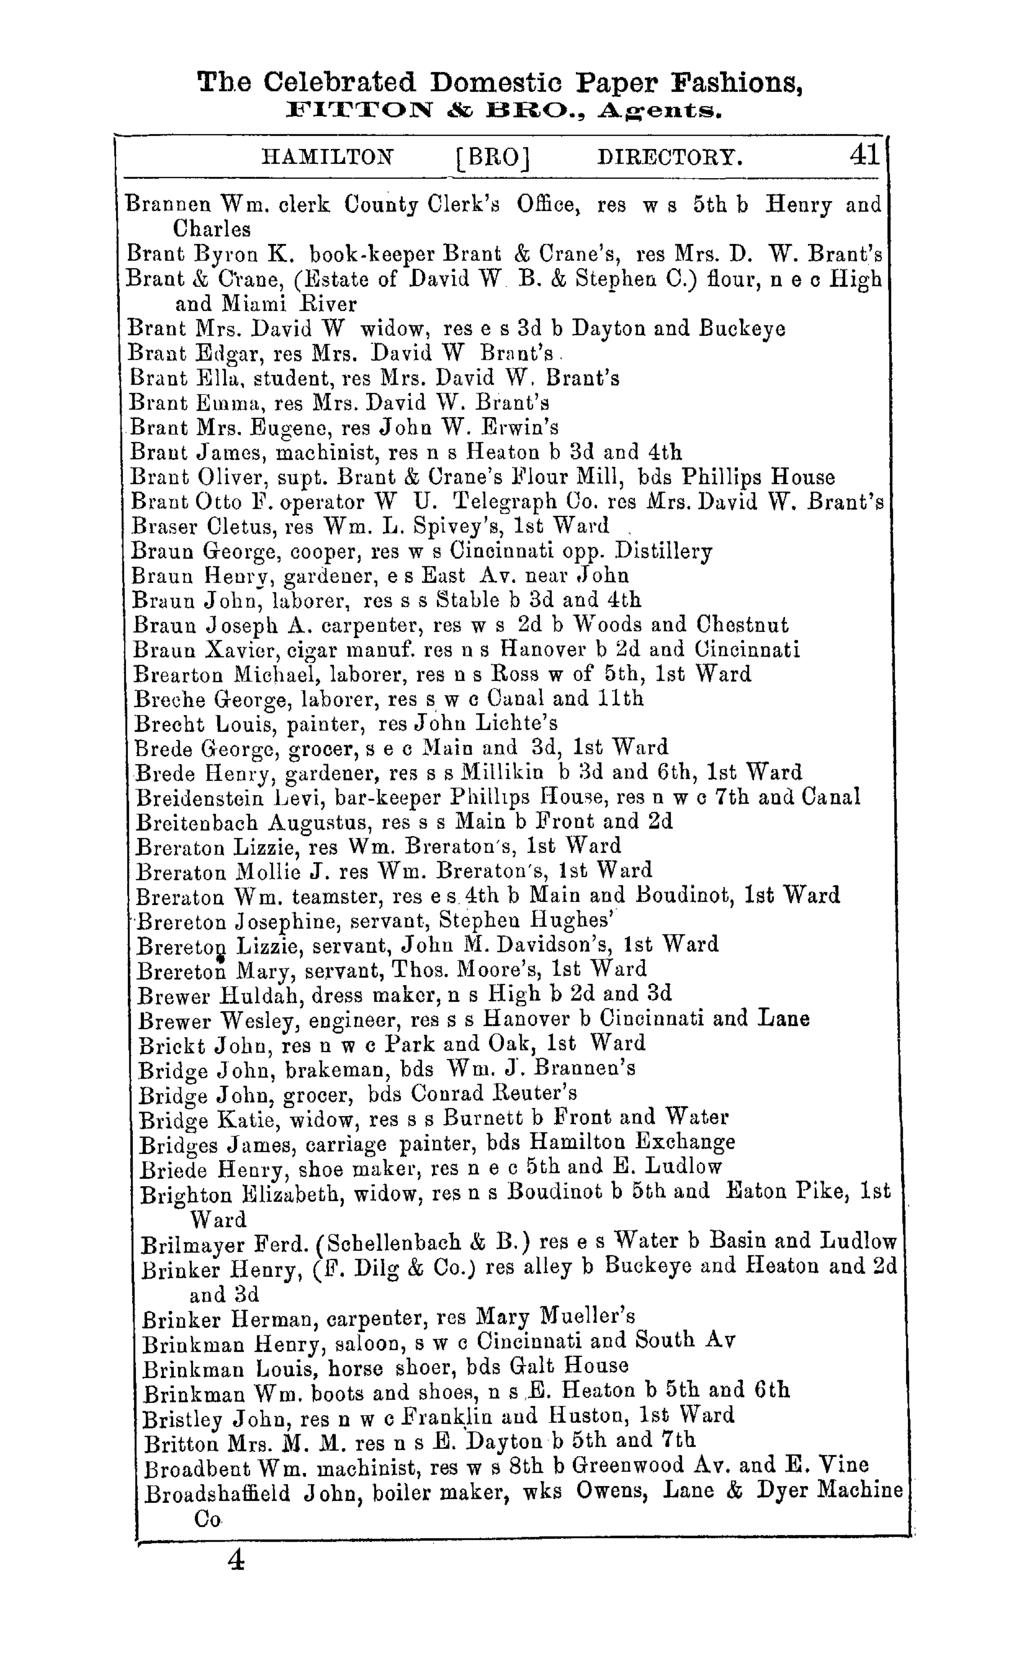 The Celebrated Domestic Paper Fashions, FITTON & BRO., A~ents. HAMILTON [BRO] DIRECTORY. 41 Brannen W m. clerk Oounty Clerk's Office, res w s 5th b Henry and Charles Brant Byron K.